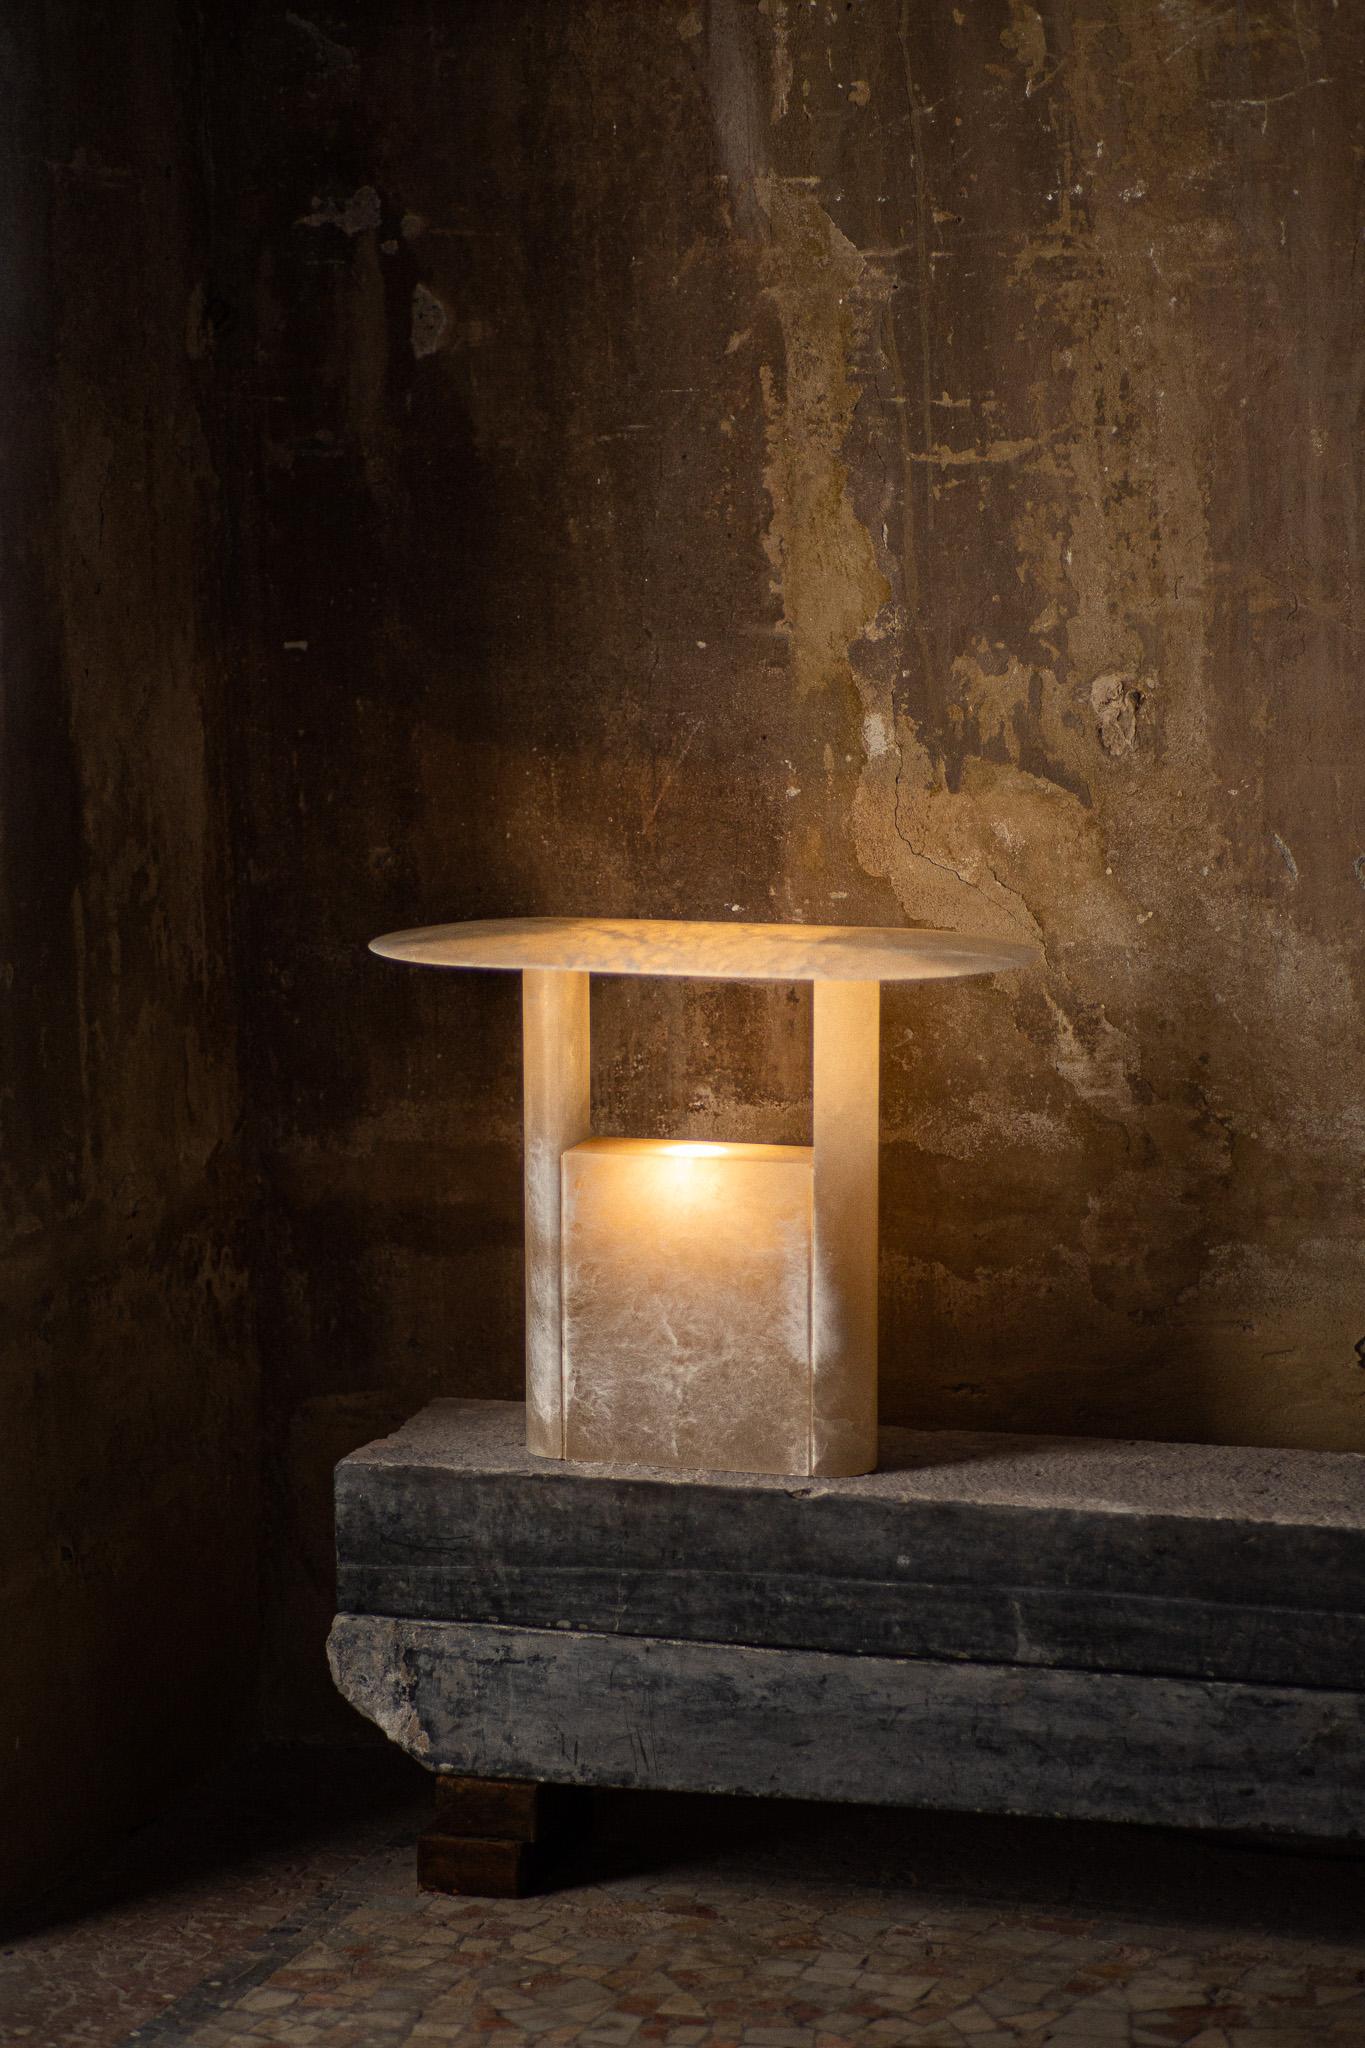 Pagoda Lamp by Henry Wilson
Sold exclusively by Galerie Philia
Limited Edition of 100 pieces
Dimensions: W 65 x D 35 x H 51 cm
Materials: White Alabaster

All our lamps can be wired according to each country. If sold to the USA it will be wired for